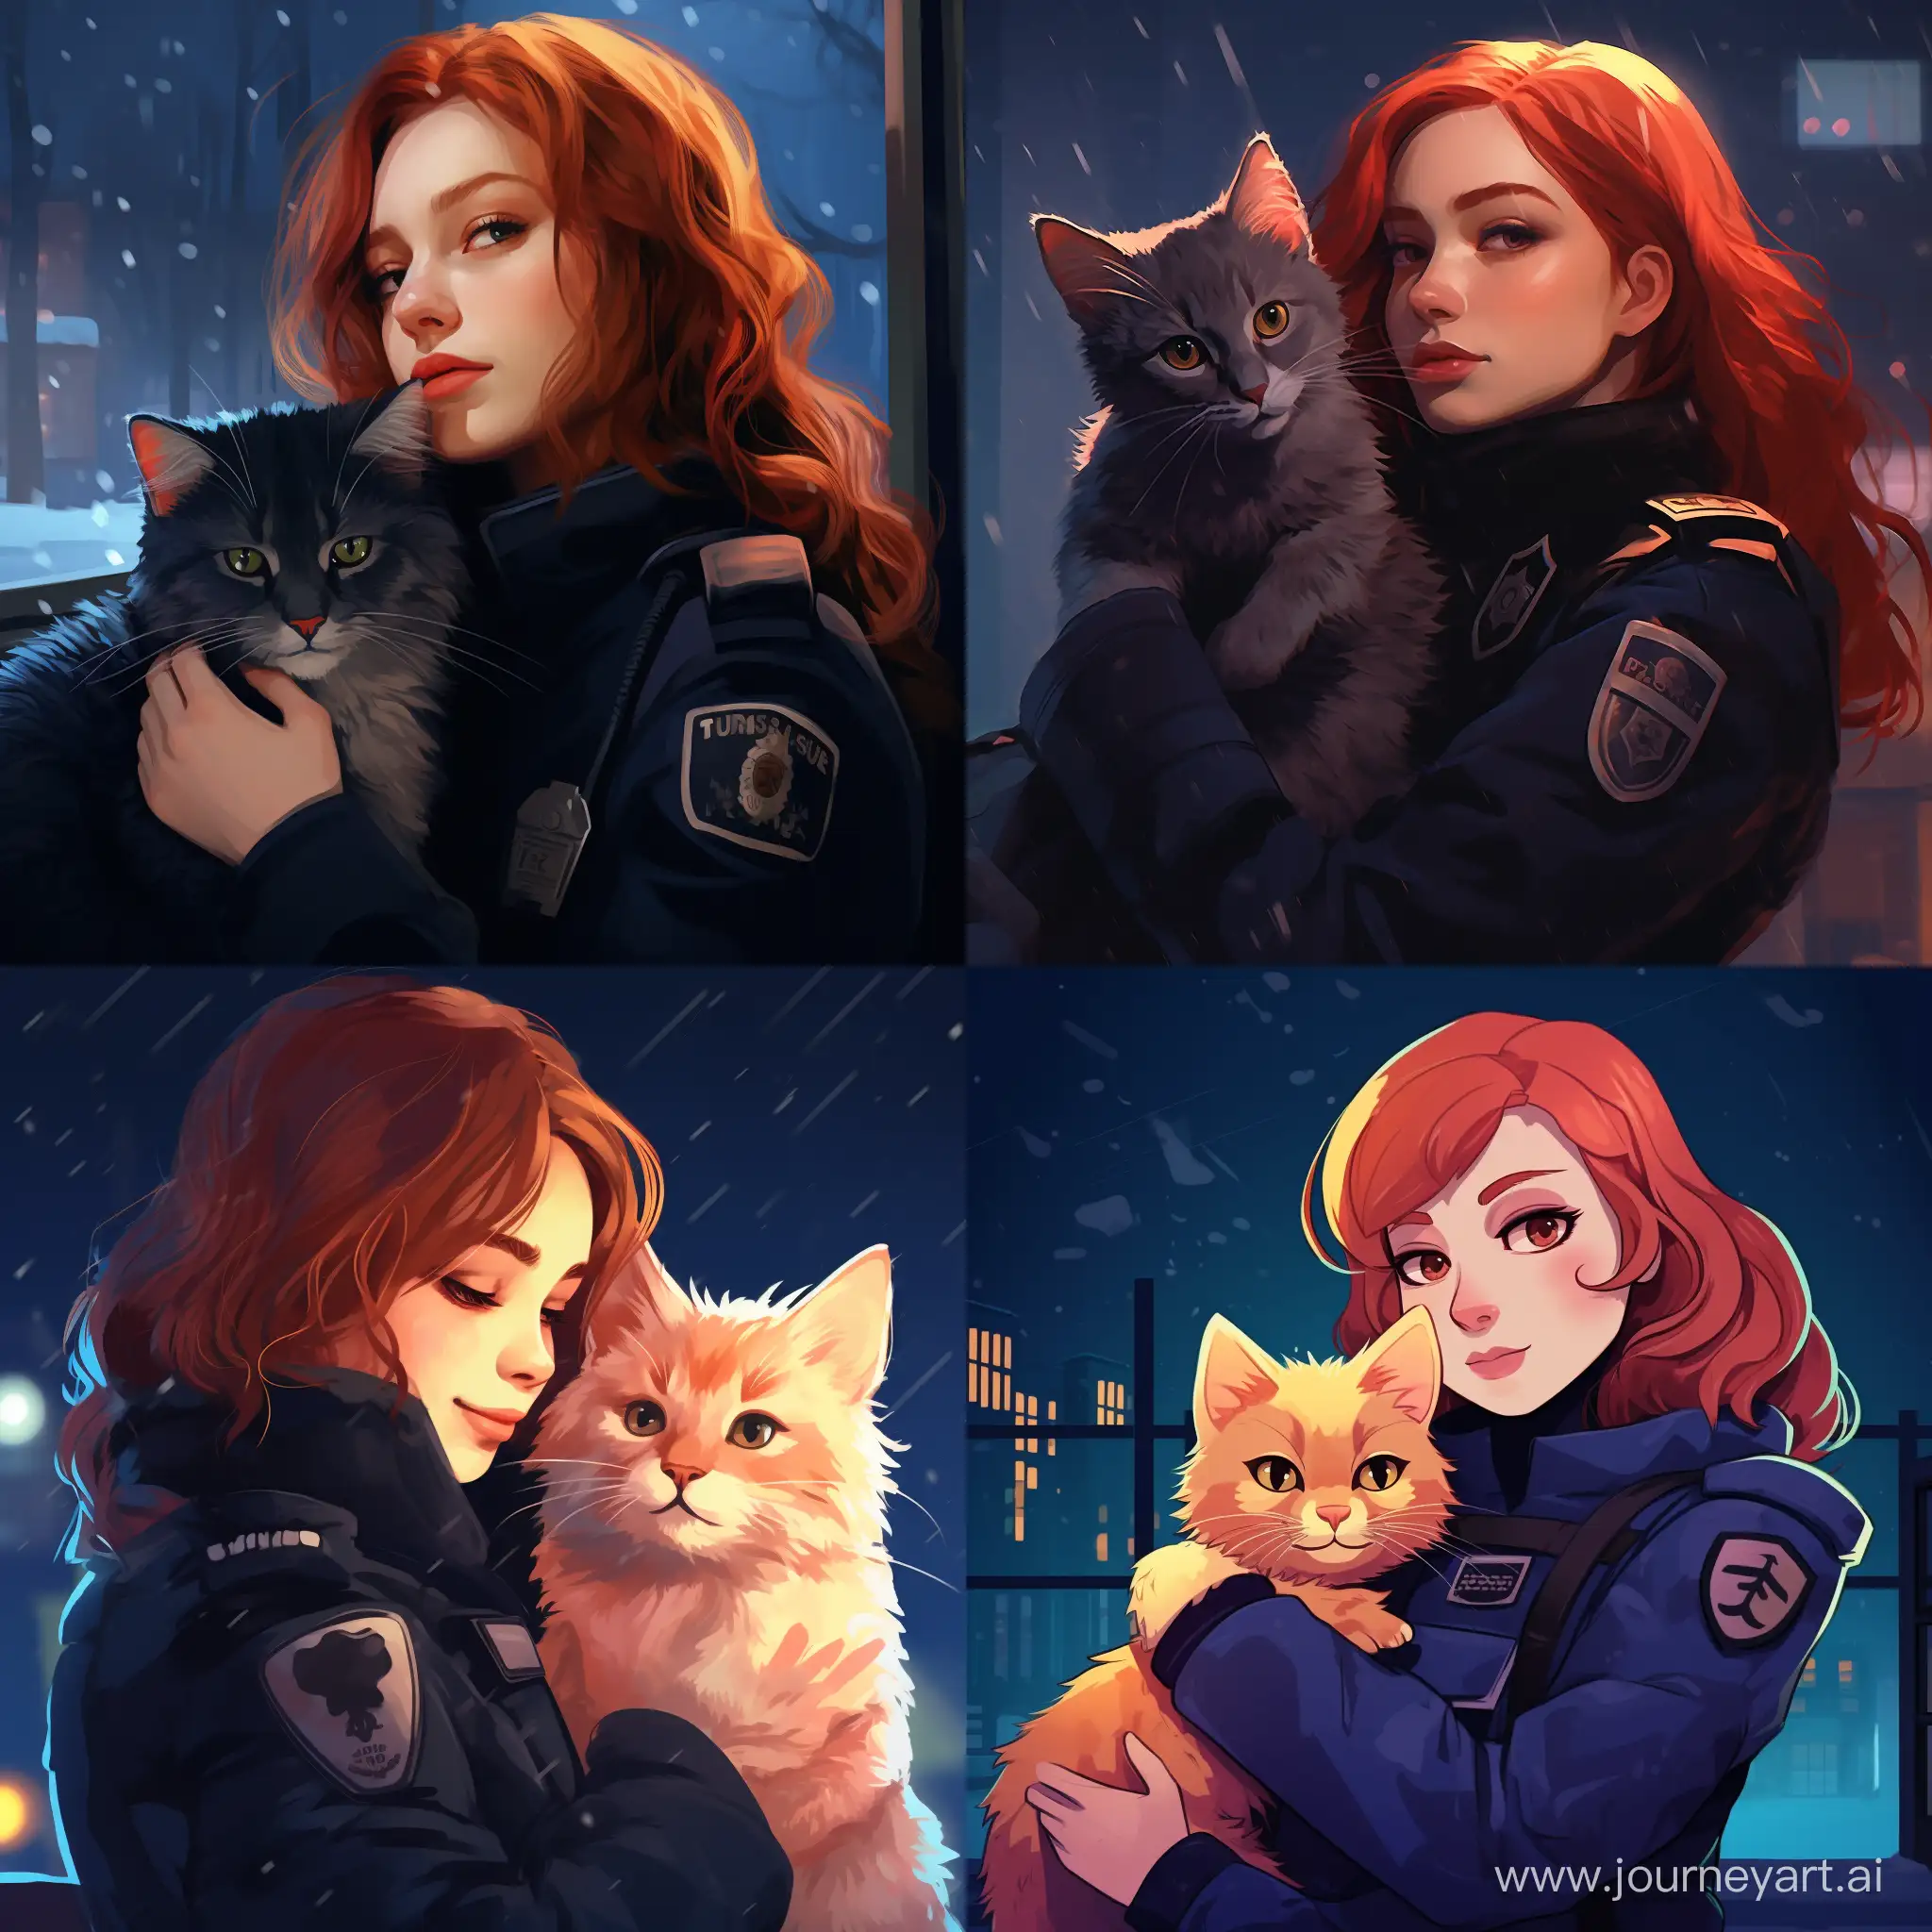 RedHaired-Girl-in-Winter-Night-Police-Uniform-Holding-Cat